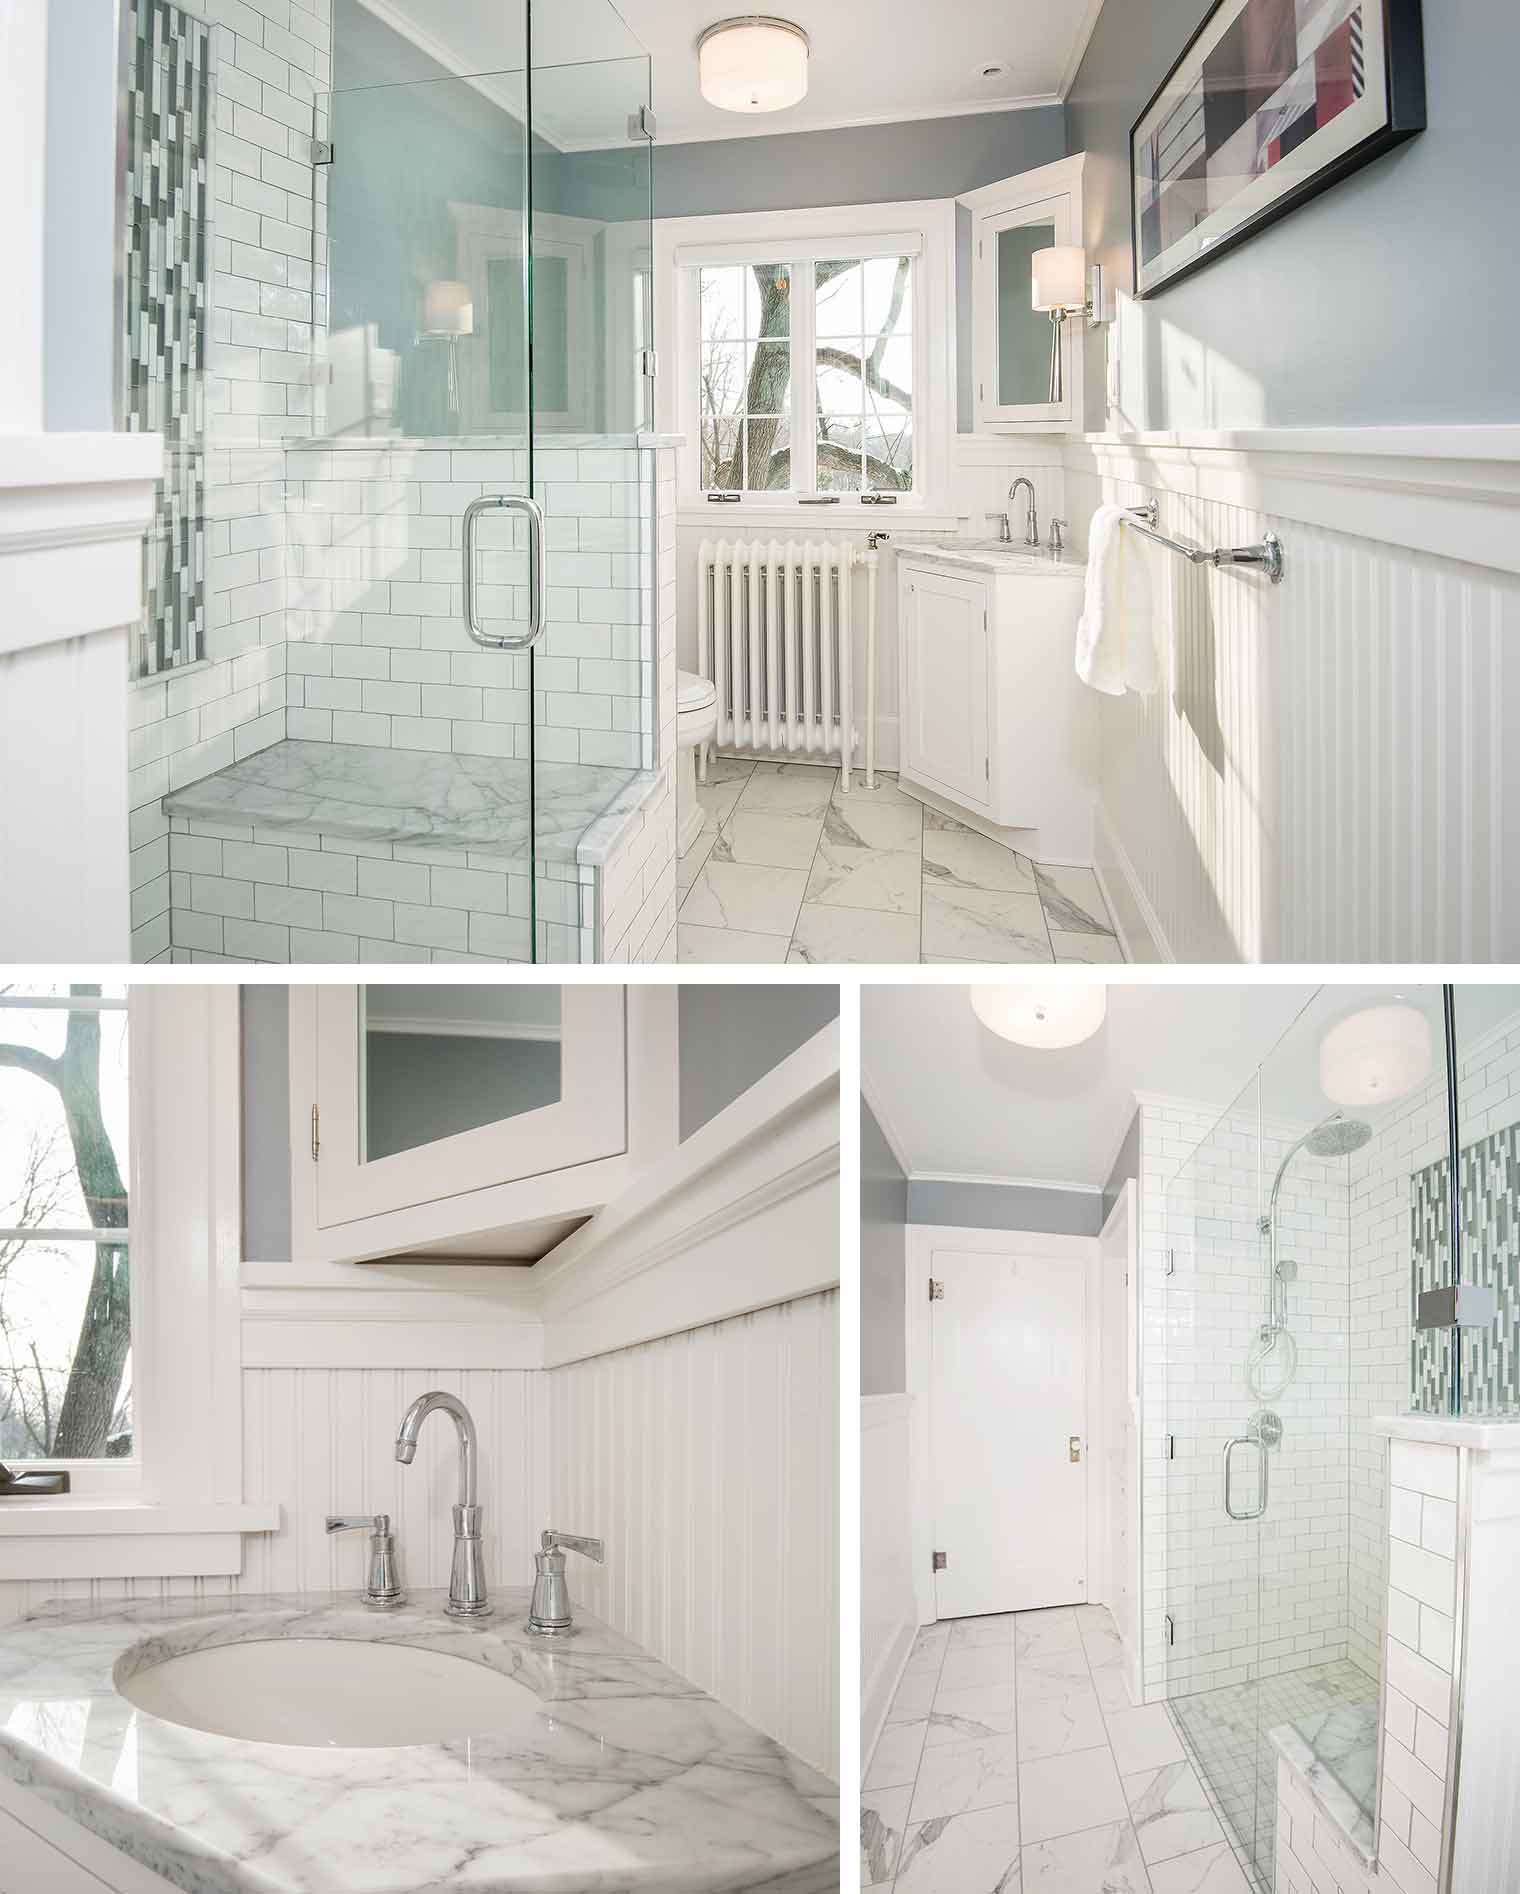 A modern bathroom design. This hallway bathroom renovation allows natural light into the entire space which features a custom corner vanity and shower with glass, marble and ceramic tile designed and built by Silent Rivers of Des Moines, Iowa